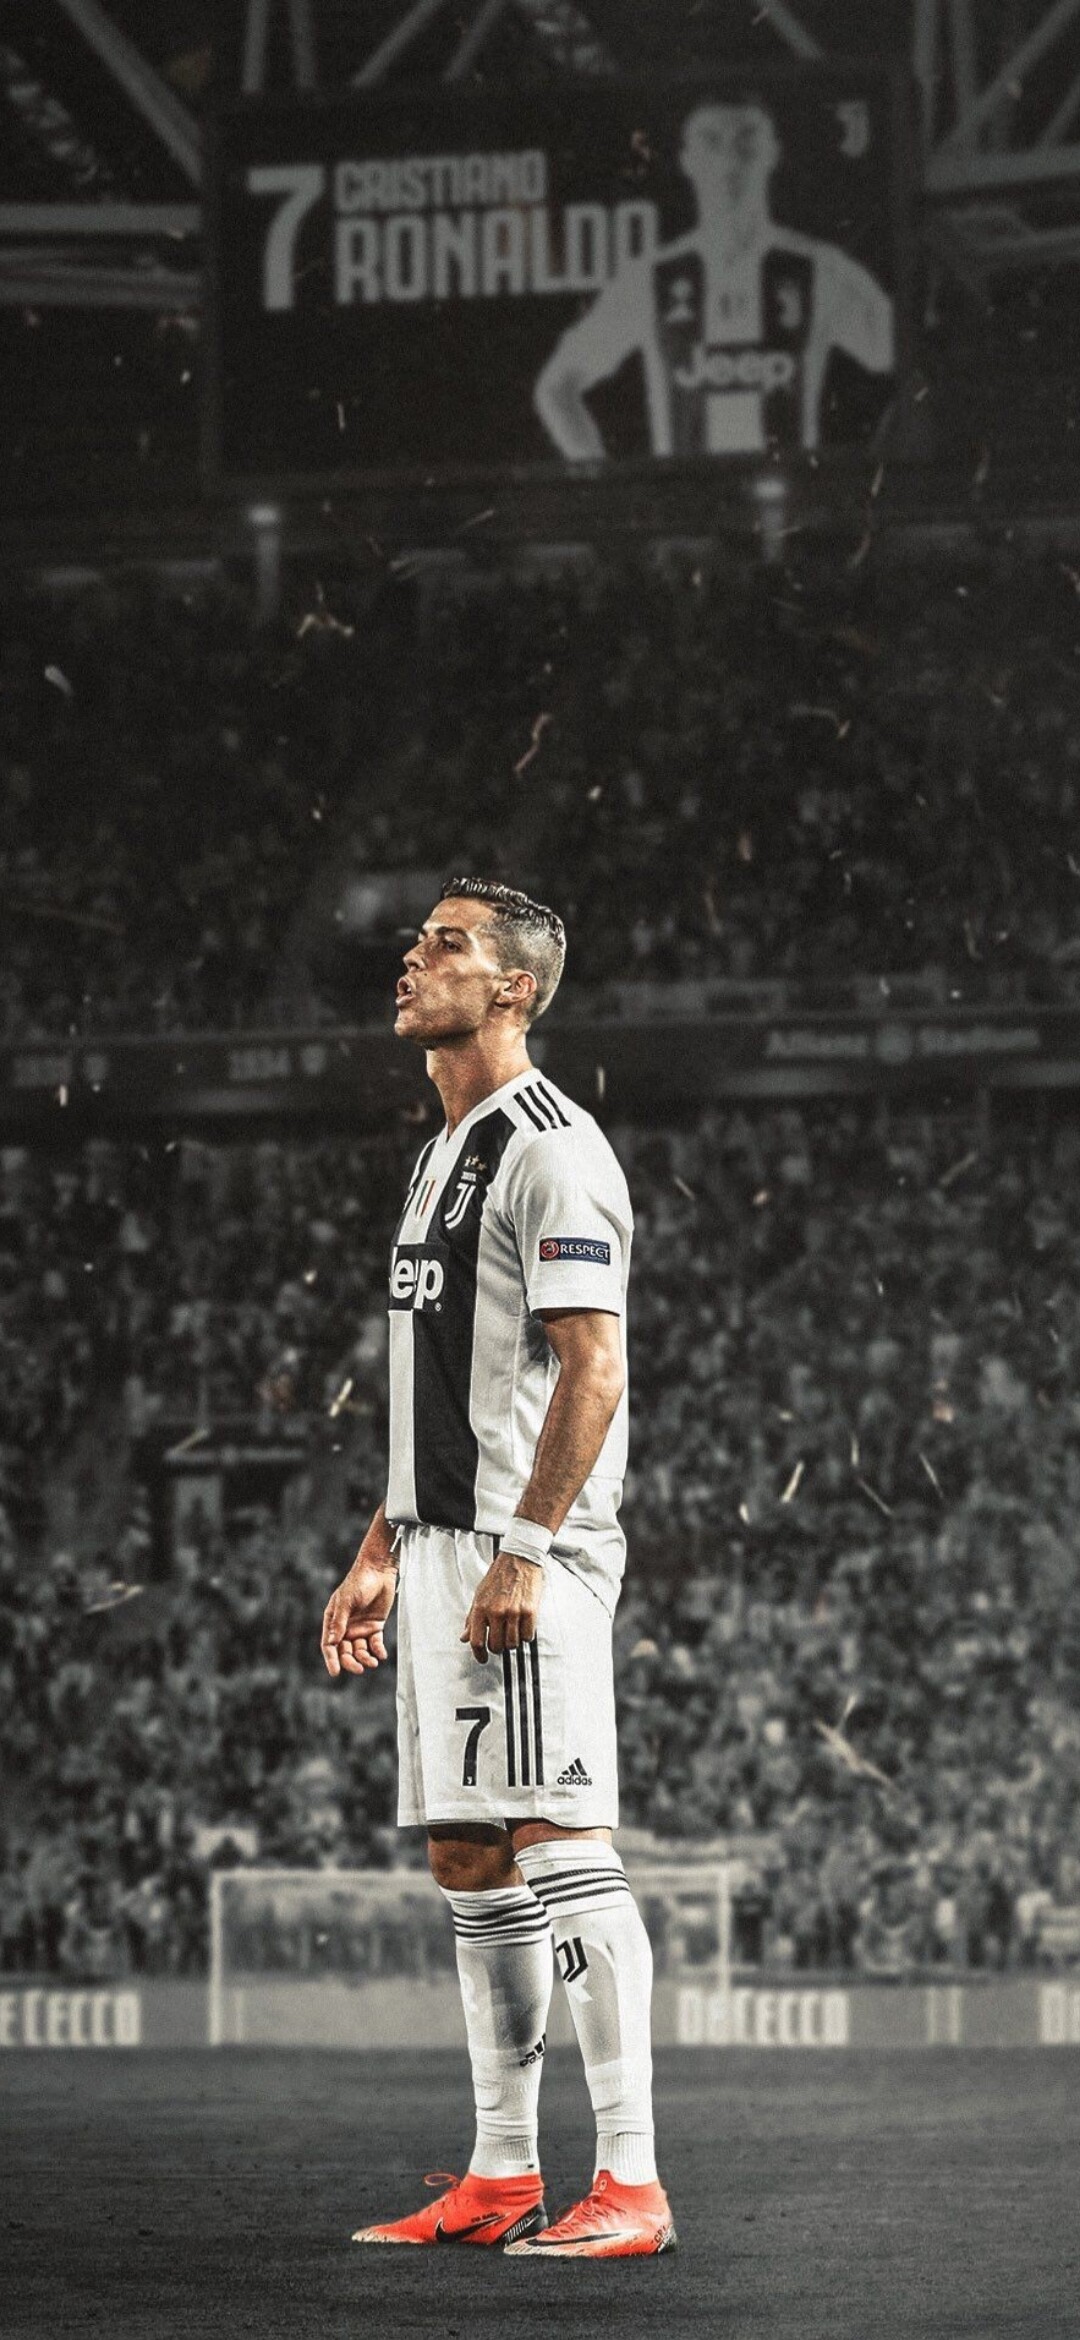 Ronaldo: The first footballer to finish as top scorer in the English, Spanish, and Italian leagues. 1080x2340 HD Wallpaper.